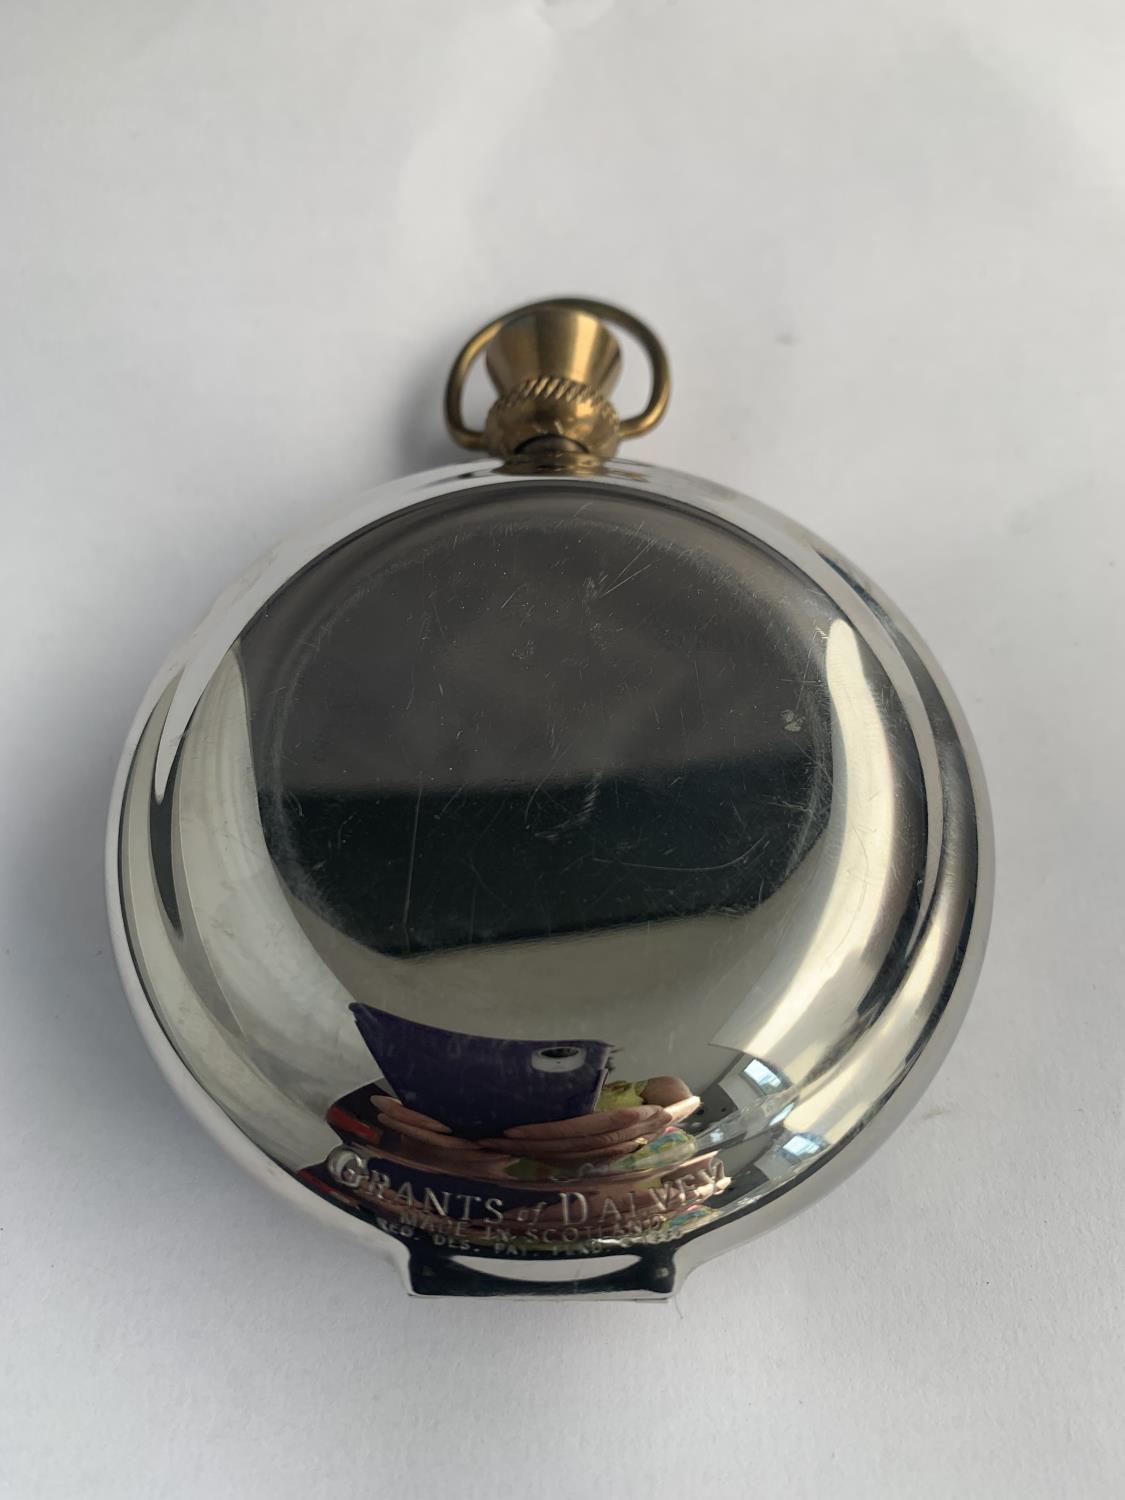 A 'THE DALVEY ST ELMO' TRAVELLING ALARM CLOCK IN THE FORM OF A LARGE POCKET WATCH - Image 5 of 5